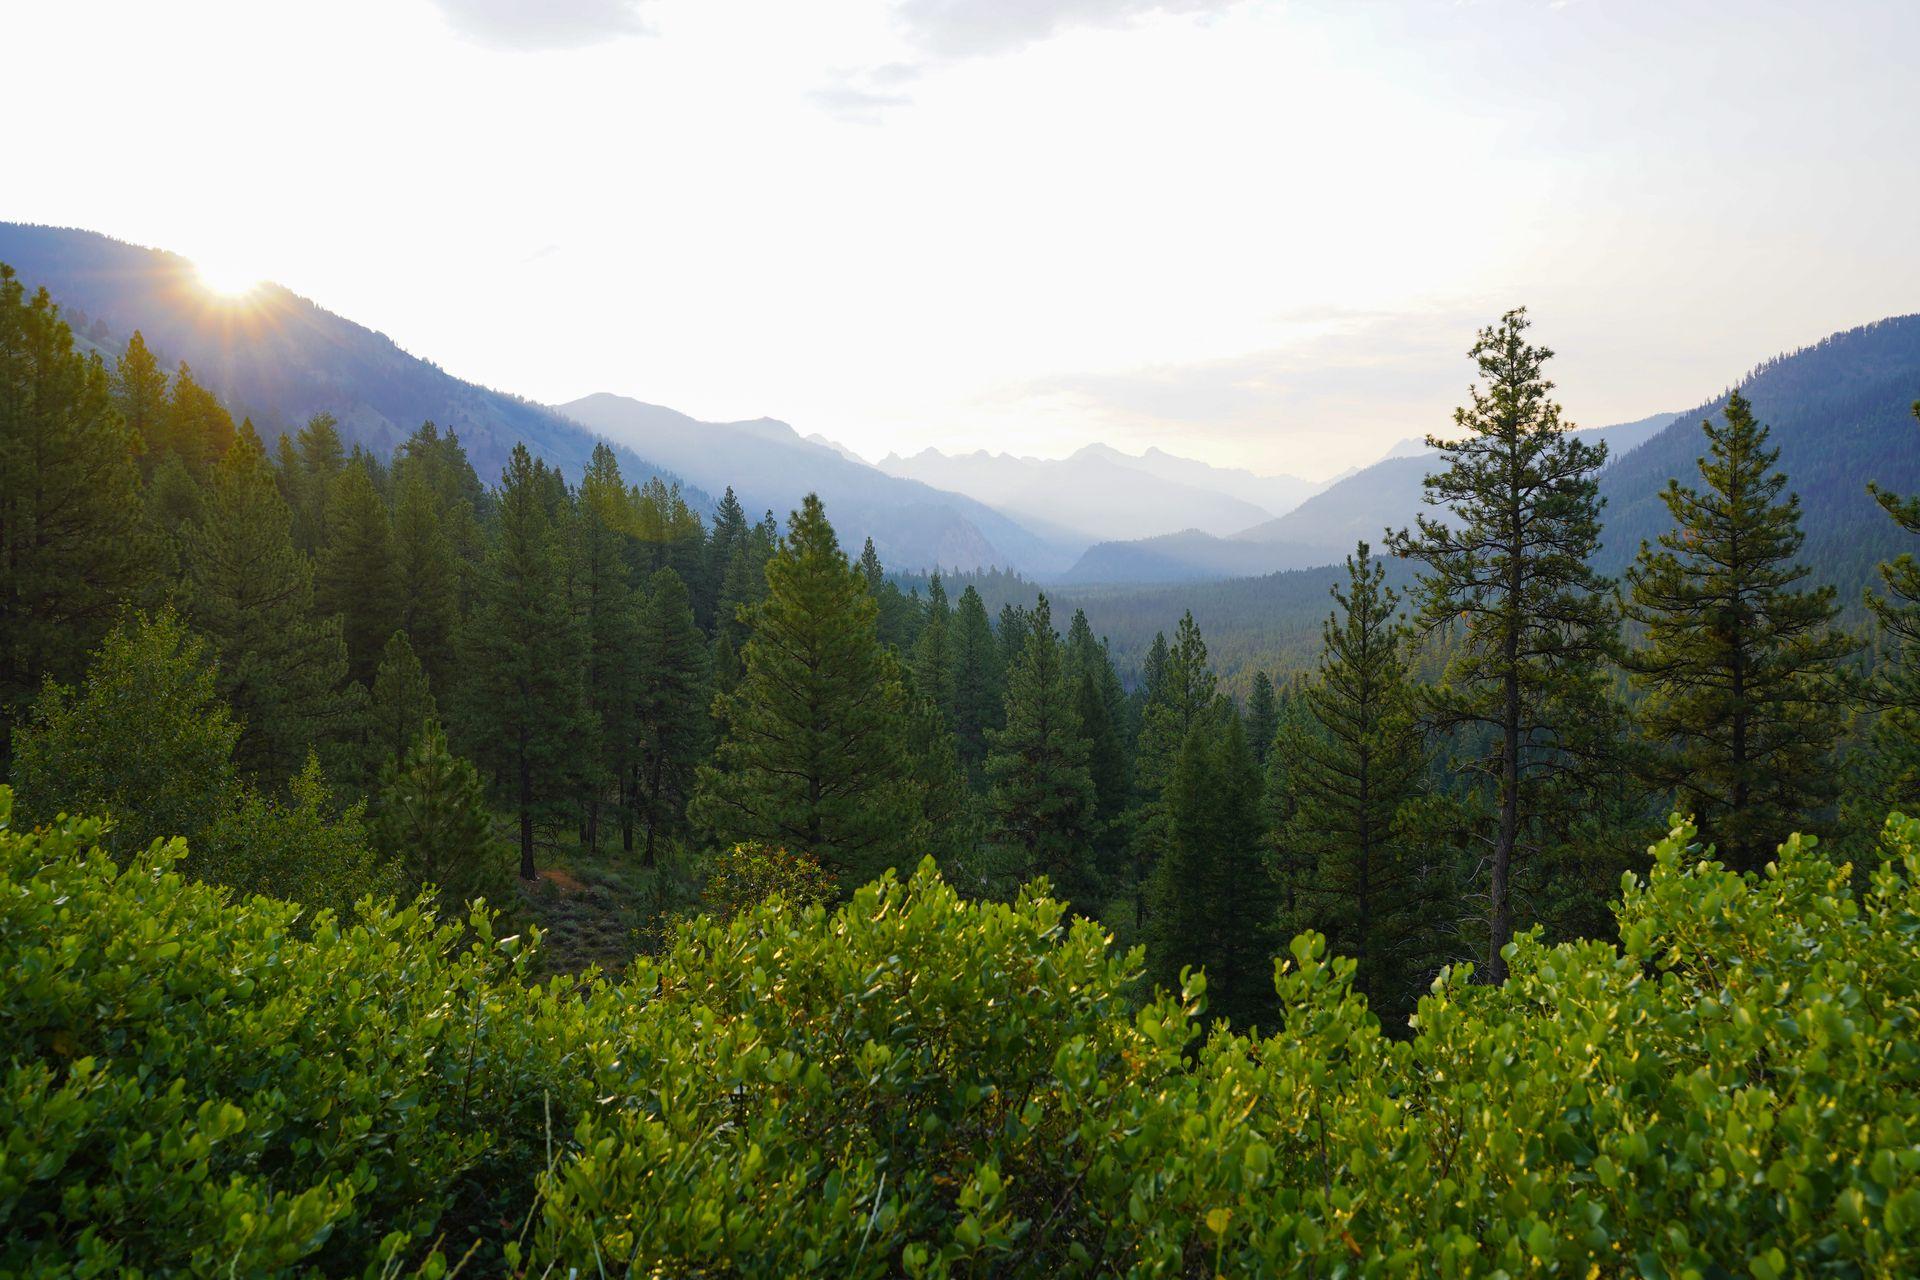 A view of trees and the Sawtooth Mountains in the distance at sunrise.